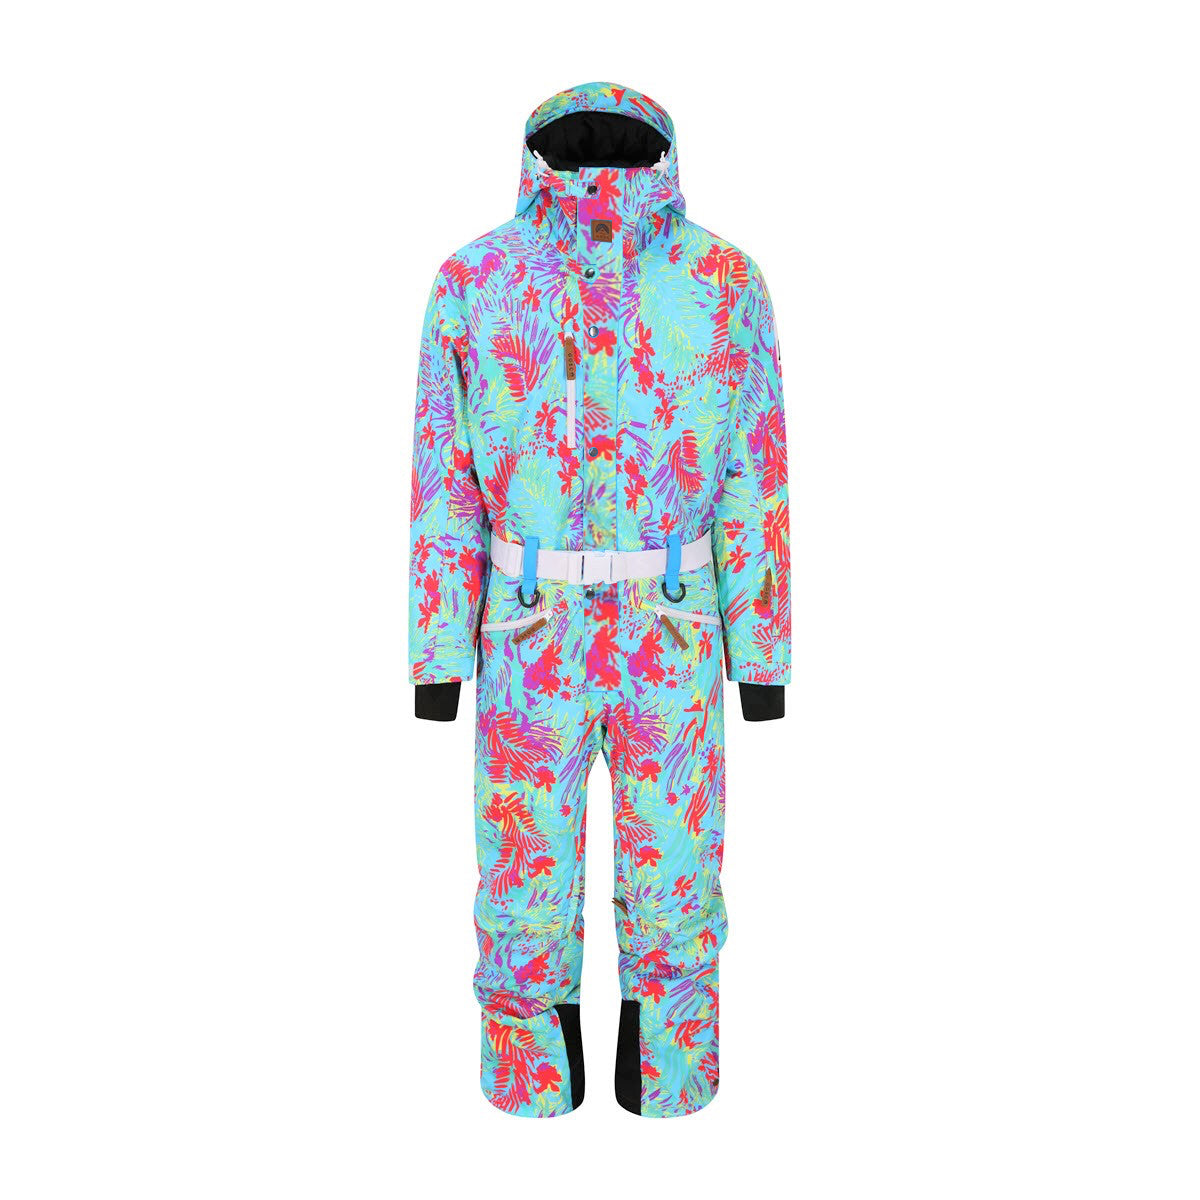 Gin and Juice All In One Ski Suit - Red Fern, Multicoloured - Mens